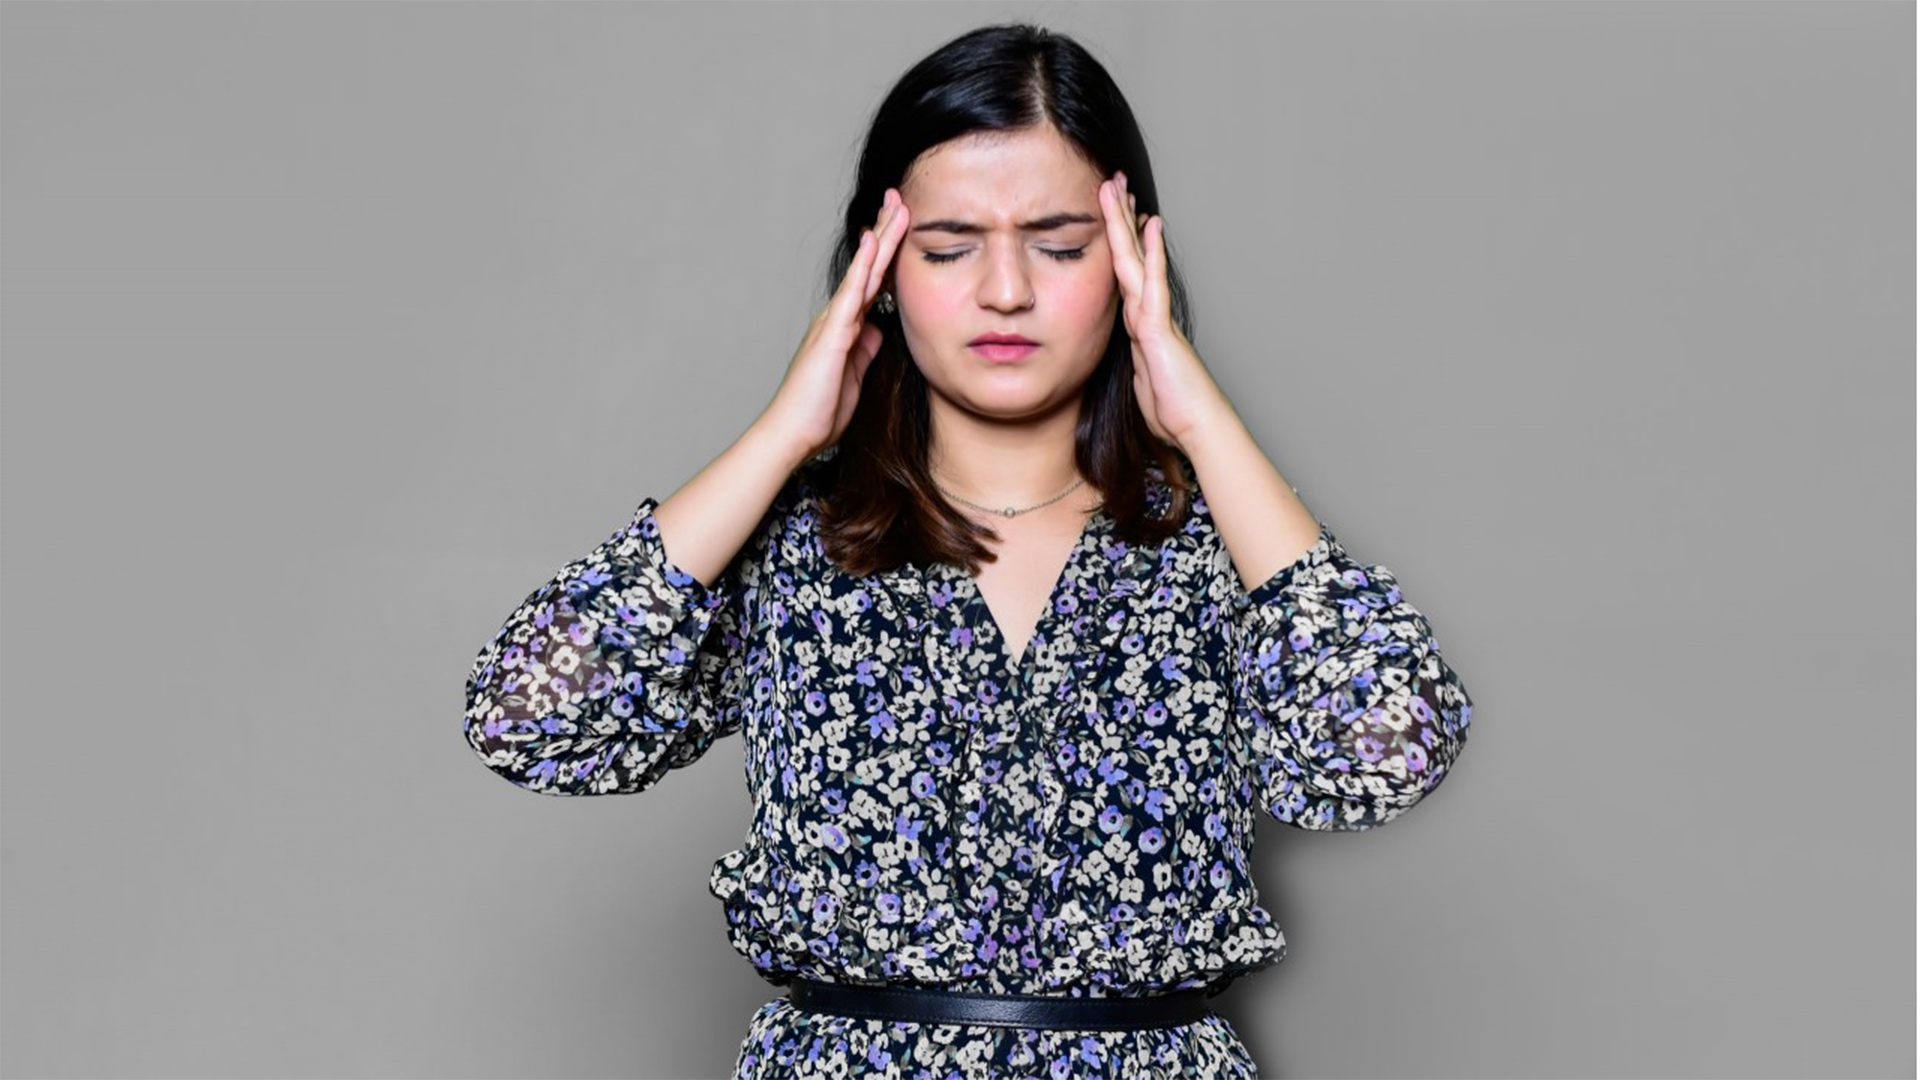 U. S. health officials say 75 percent of migraine sufferers are women.